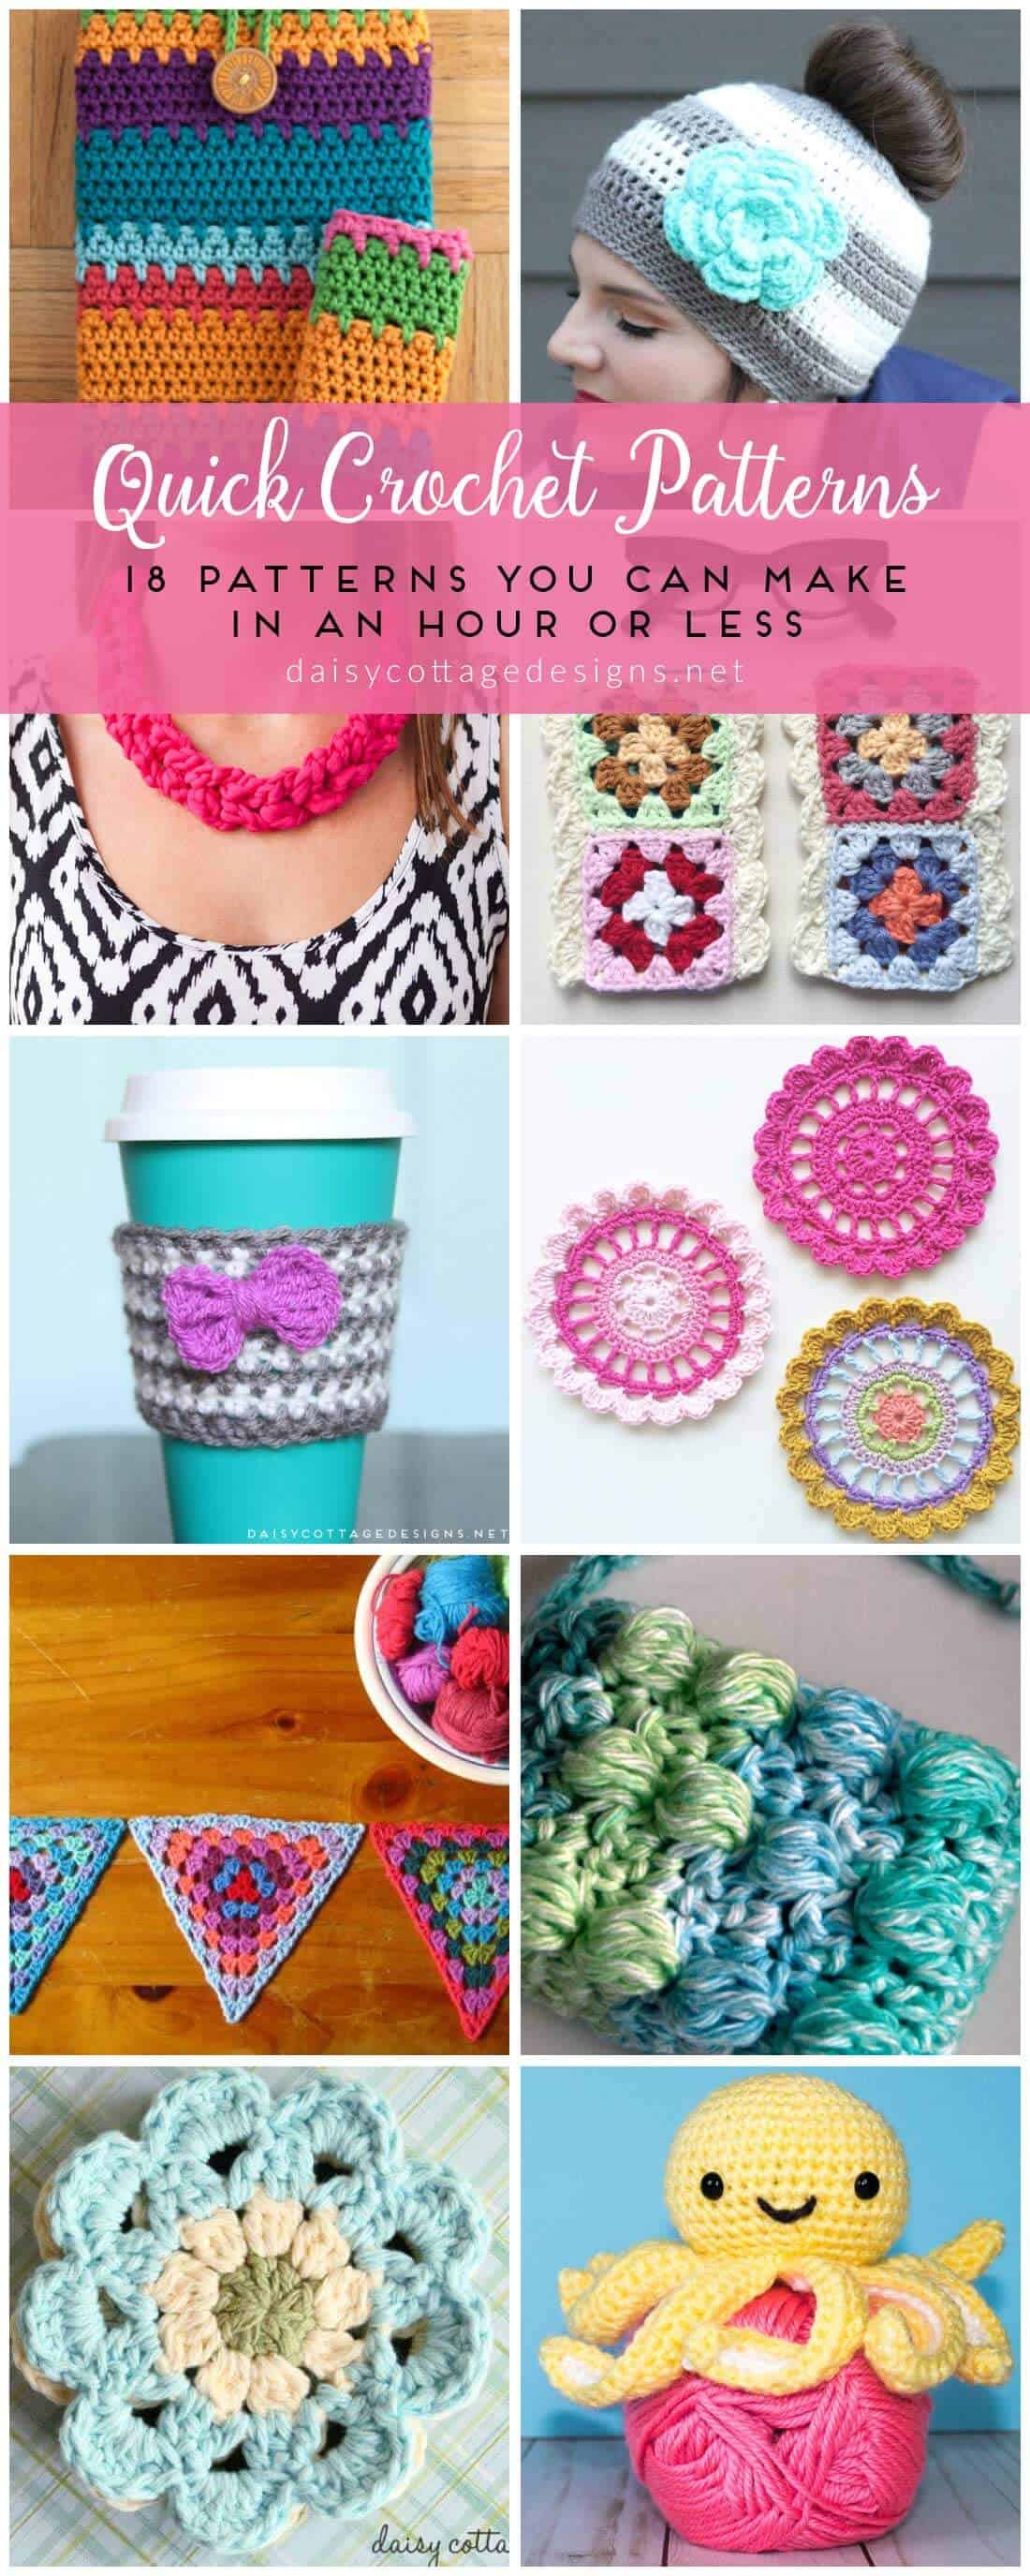 easy crochet patterns | quick crochet patterns | fast crochet projects | free crochet patterns | Daisy Cottage Designs has compiled this adorable collection of crochet patterns that are both quick and easy to make! Use them to make gifts for friends or goodies for yourself!